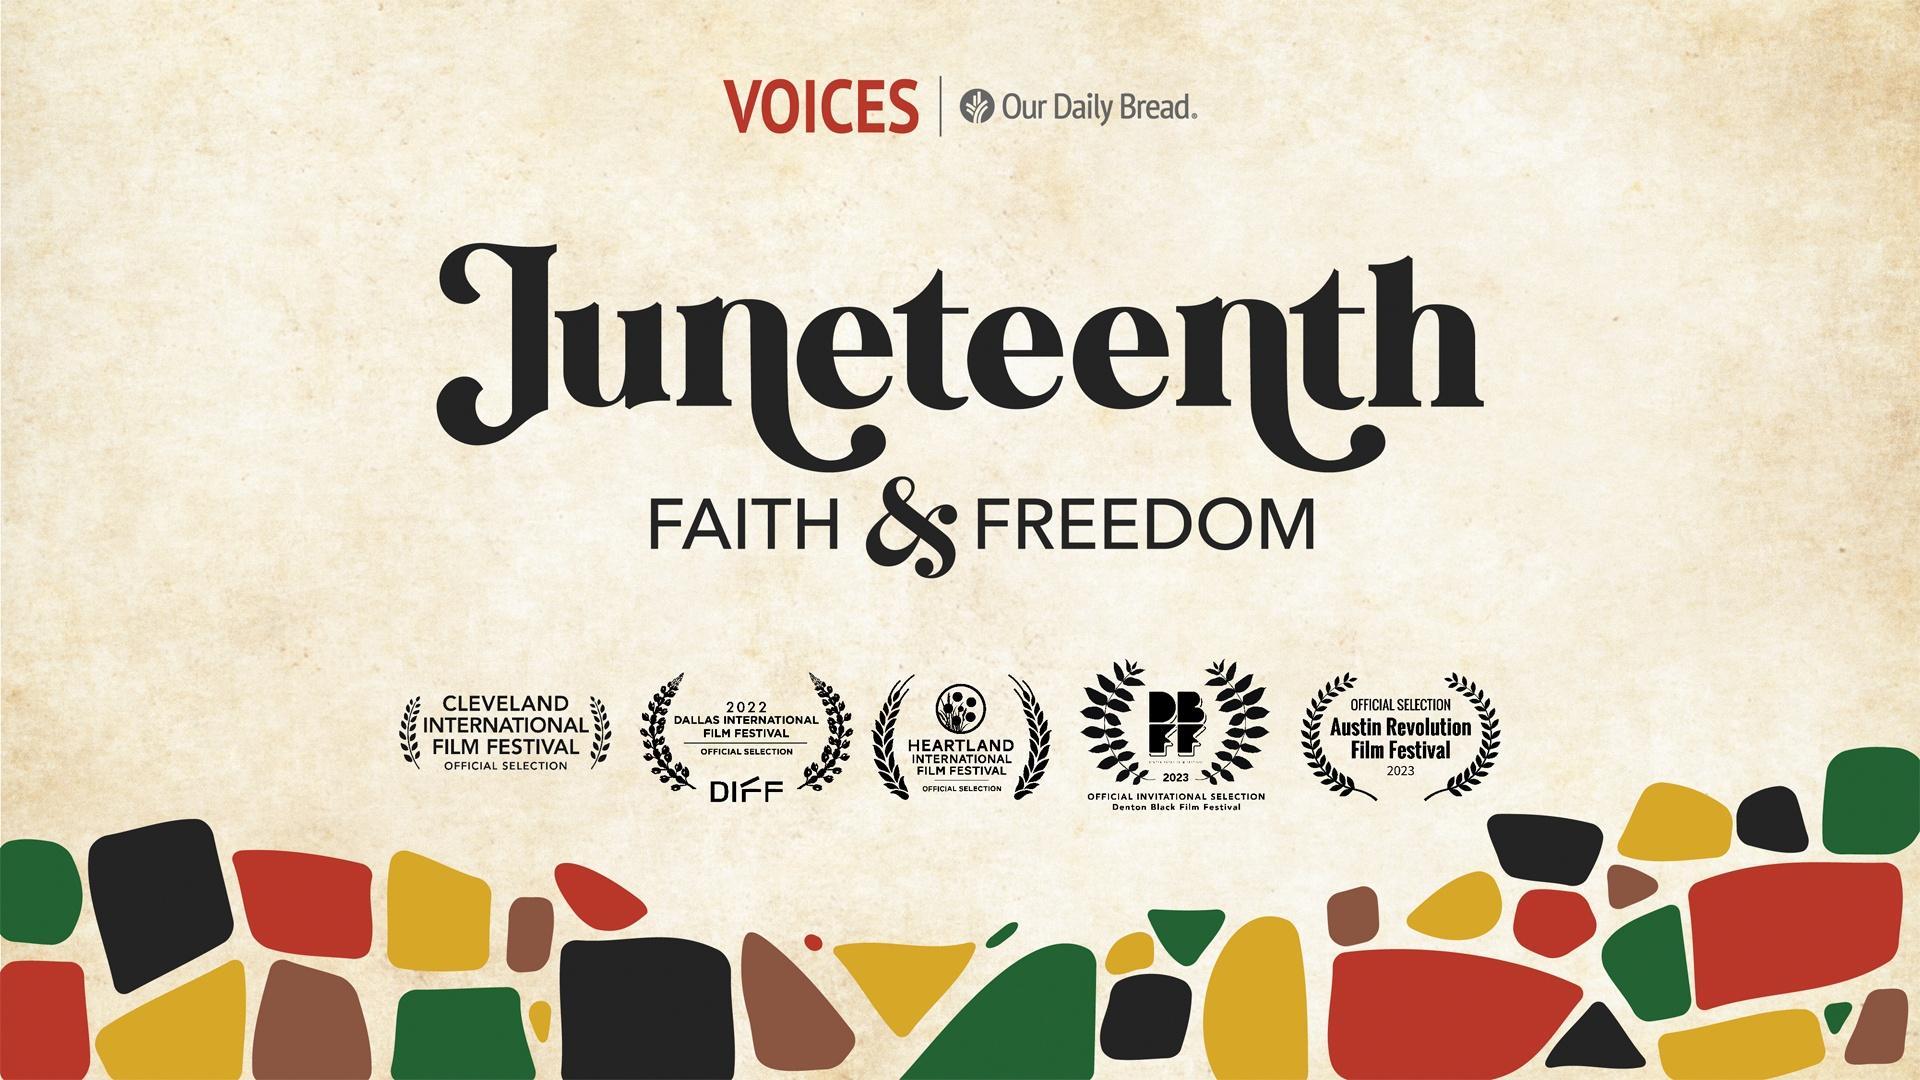 Juneteenth: Faith & Freedom promotional banner. 